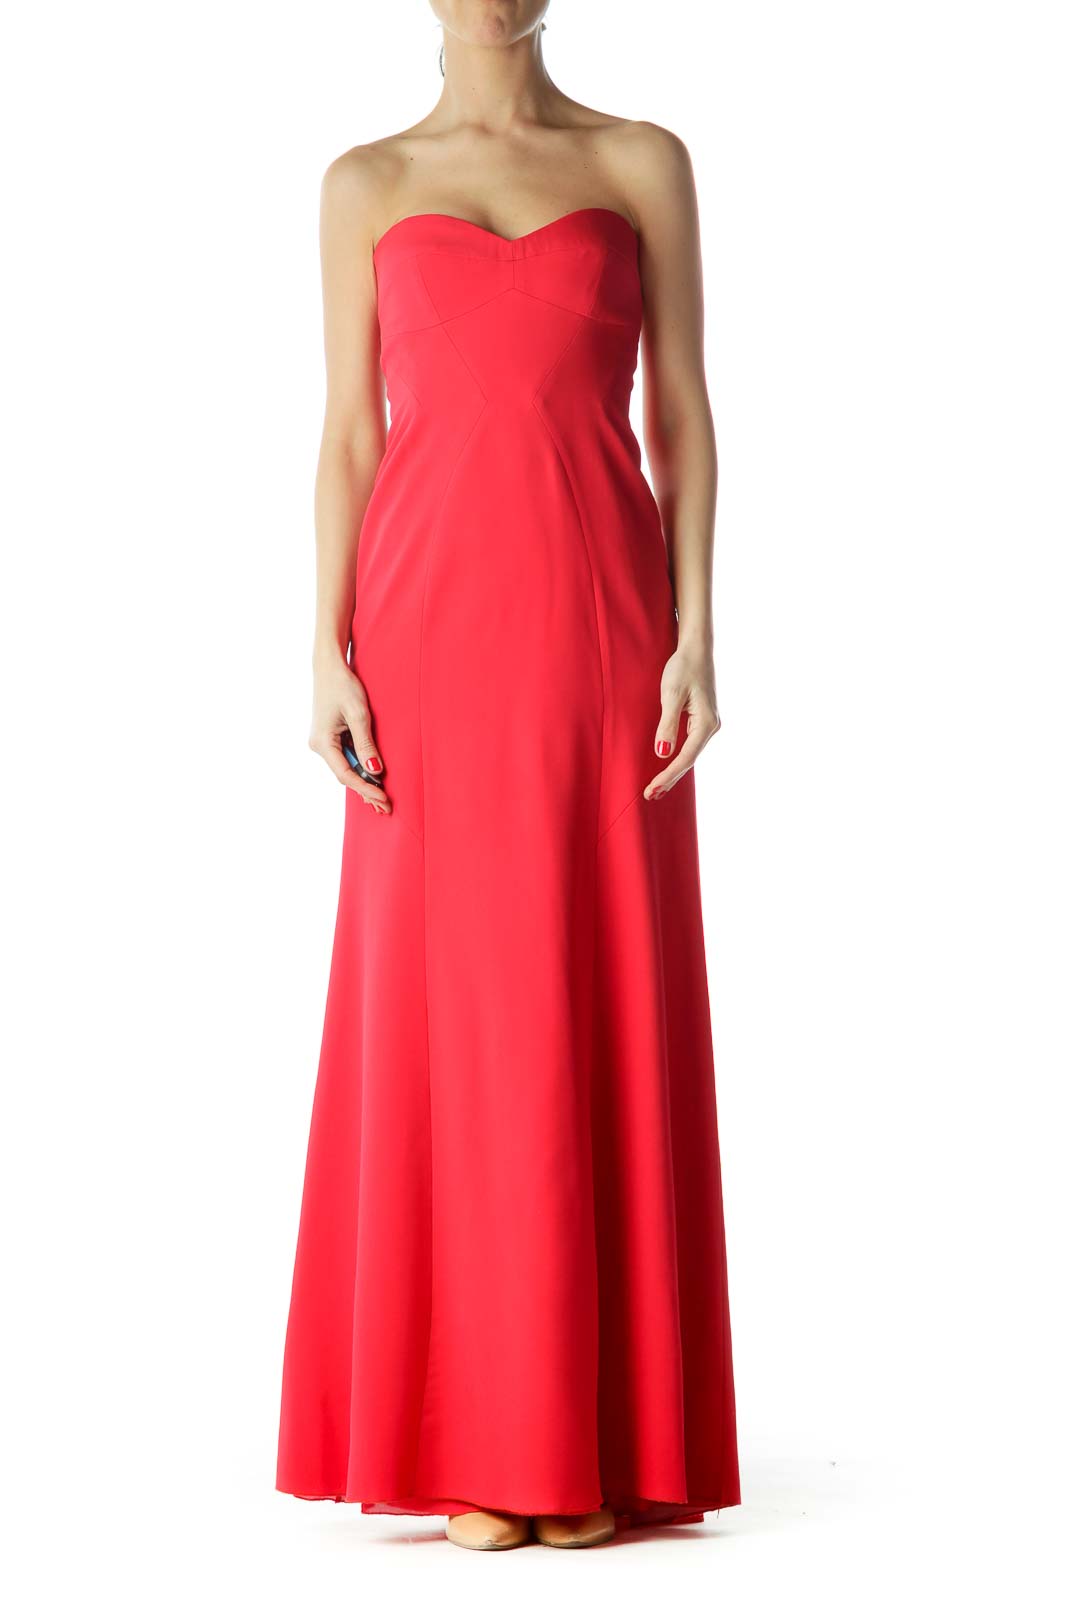 Red Strapless Sweetheart Neck Long Evening Dress Front